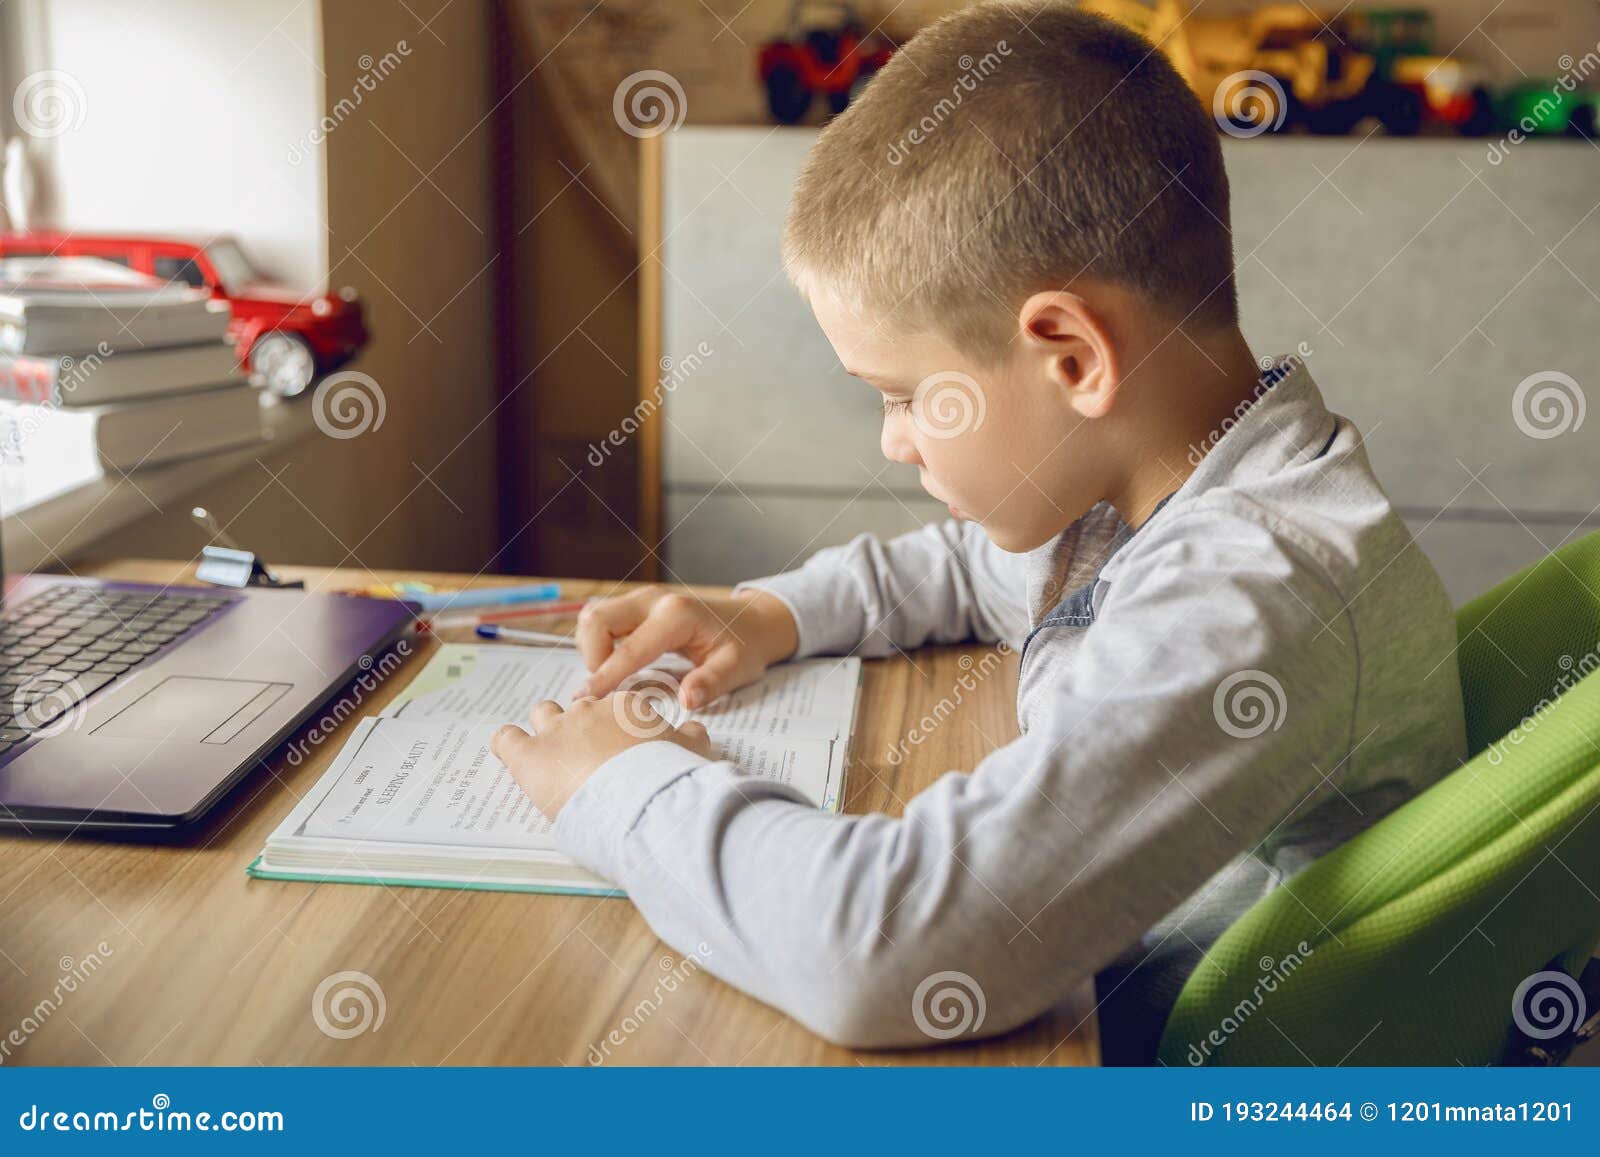 The Boy Does His Homework at Home. Online Training Stock Photo - Image